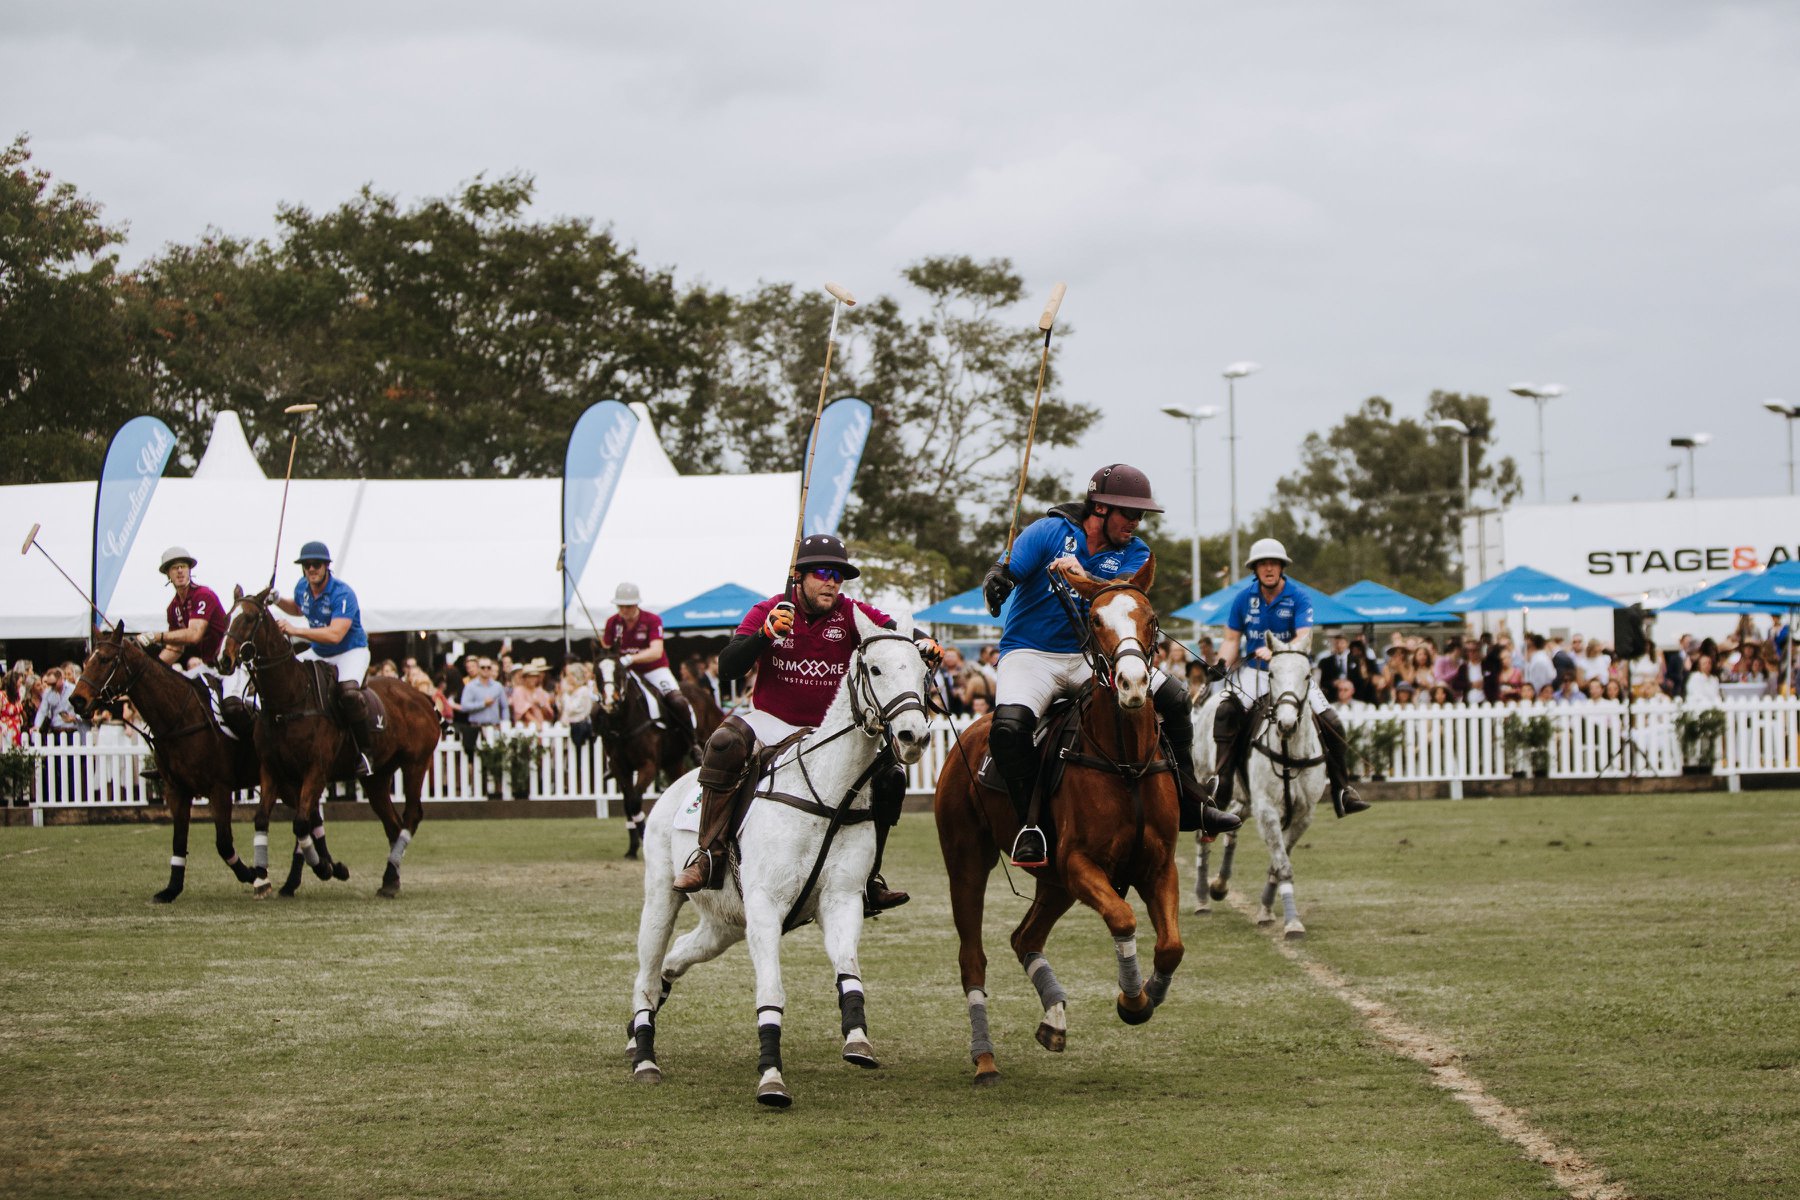 SPEND YOUR WEEKEND AT THE POP-UP POLO